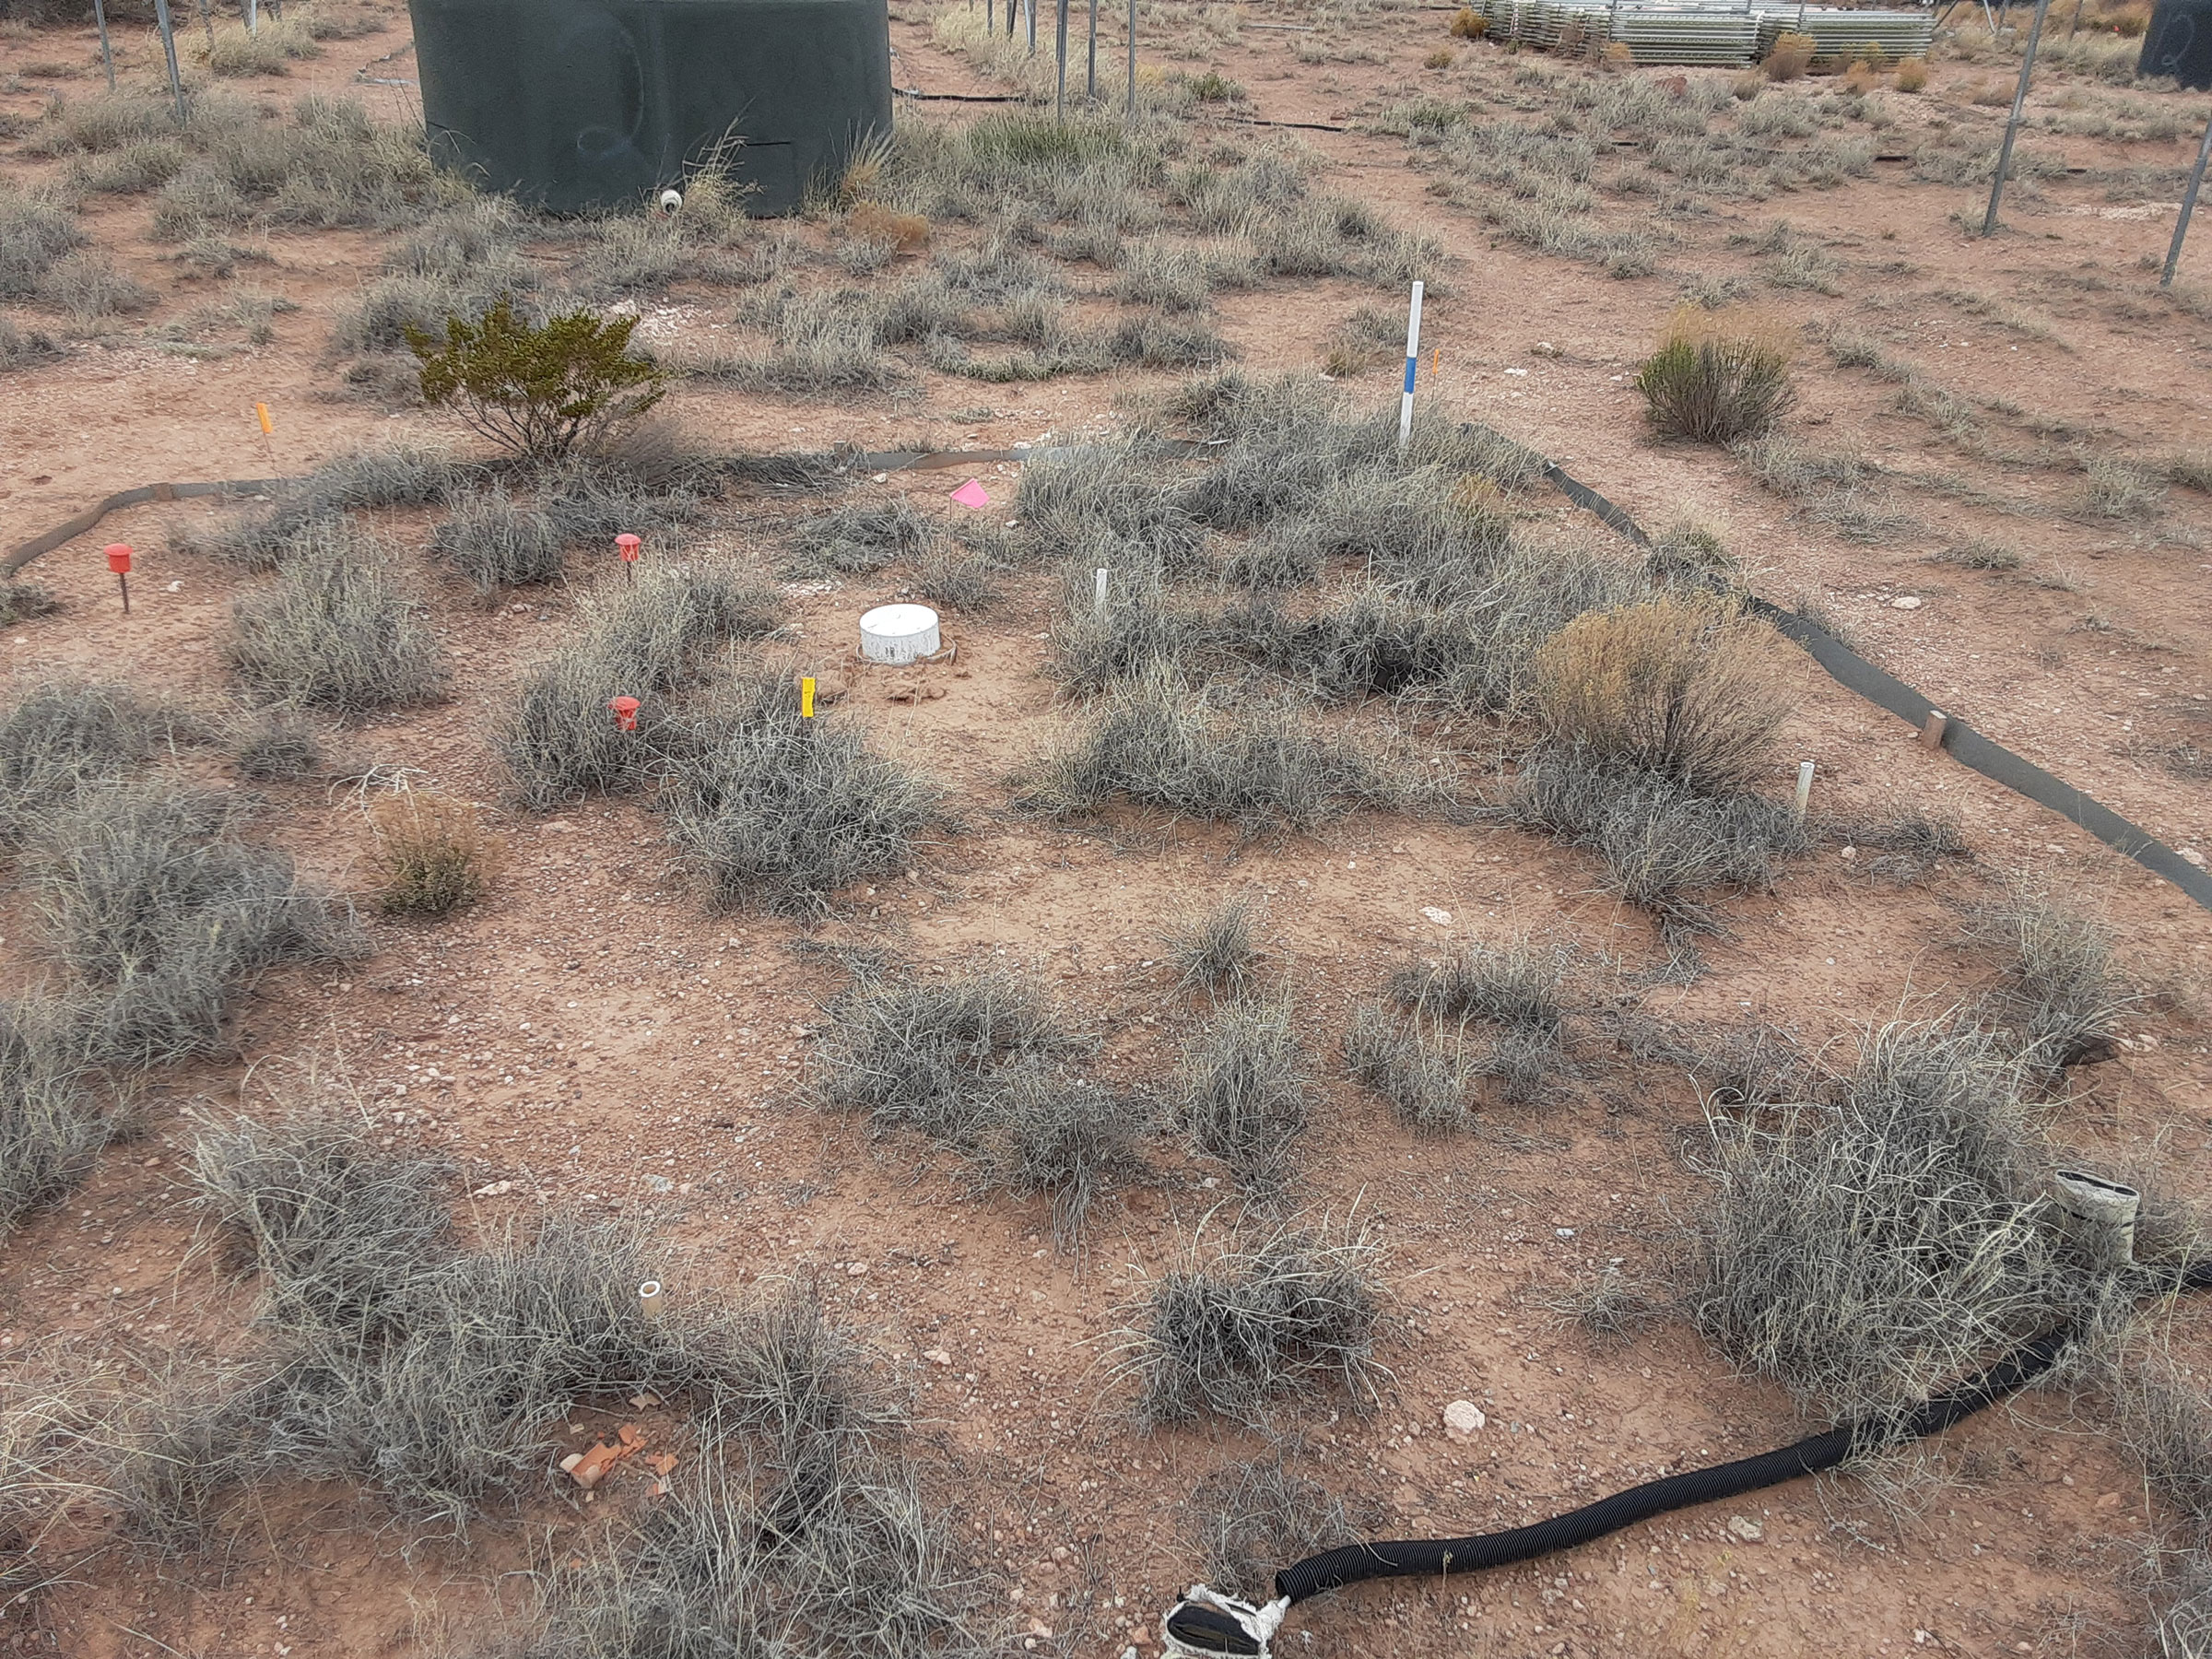 An extreme drought control plot with various sensors and subplots.